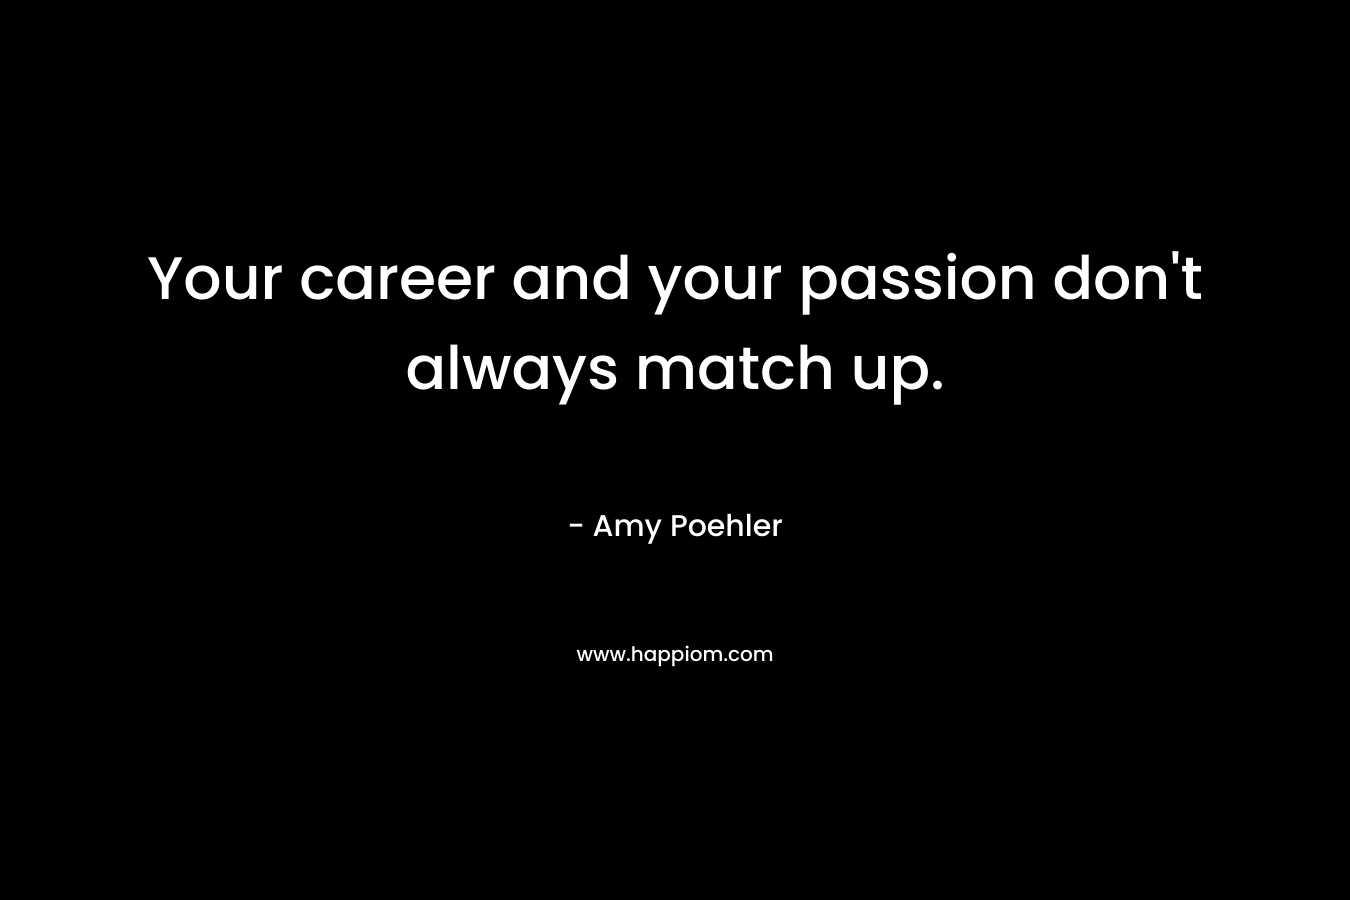 Your career and your passion don't always match up.